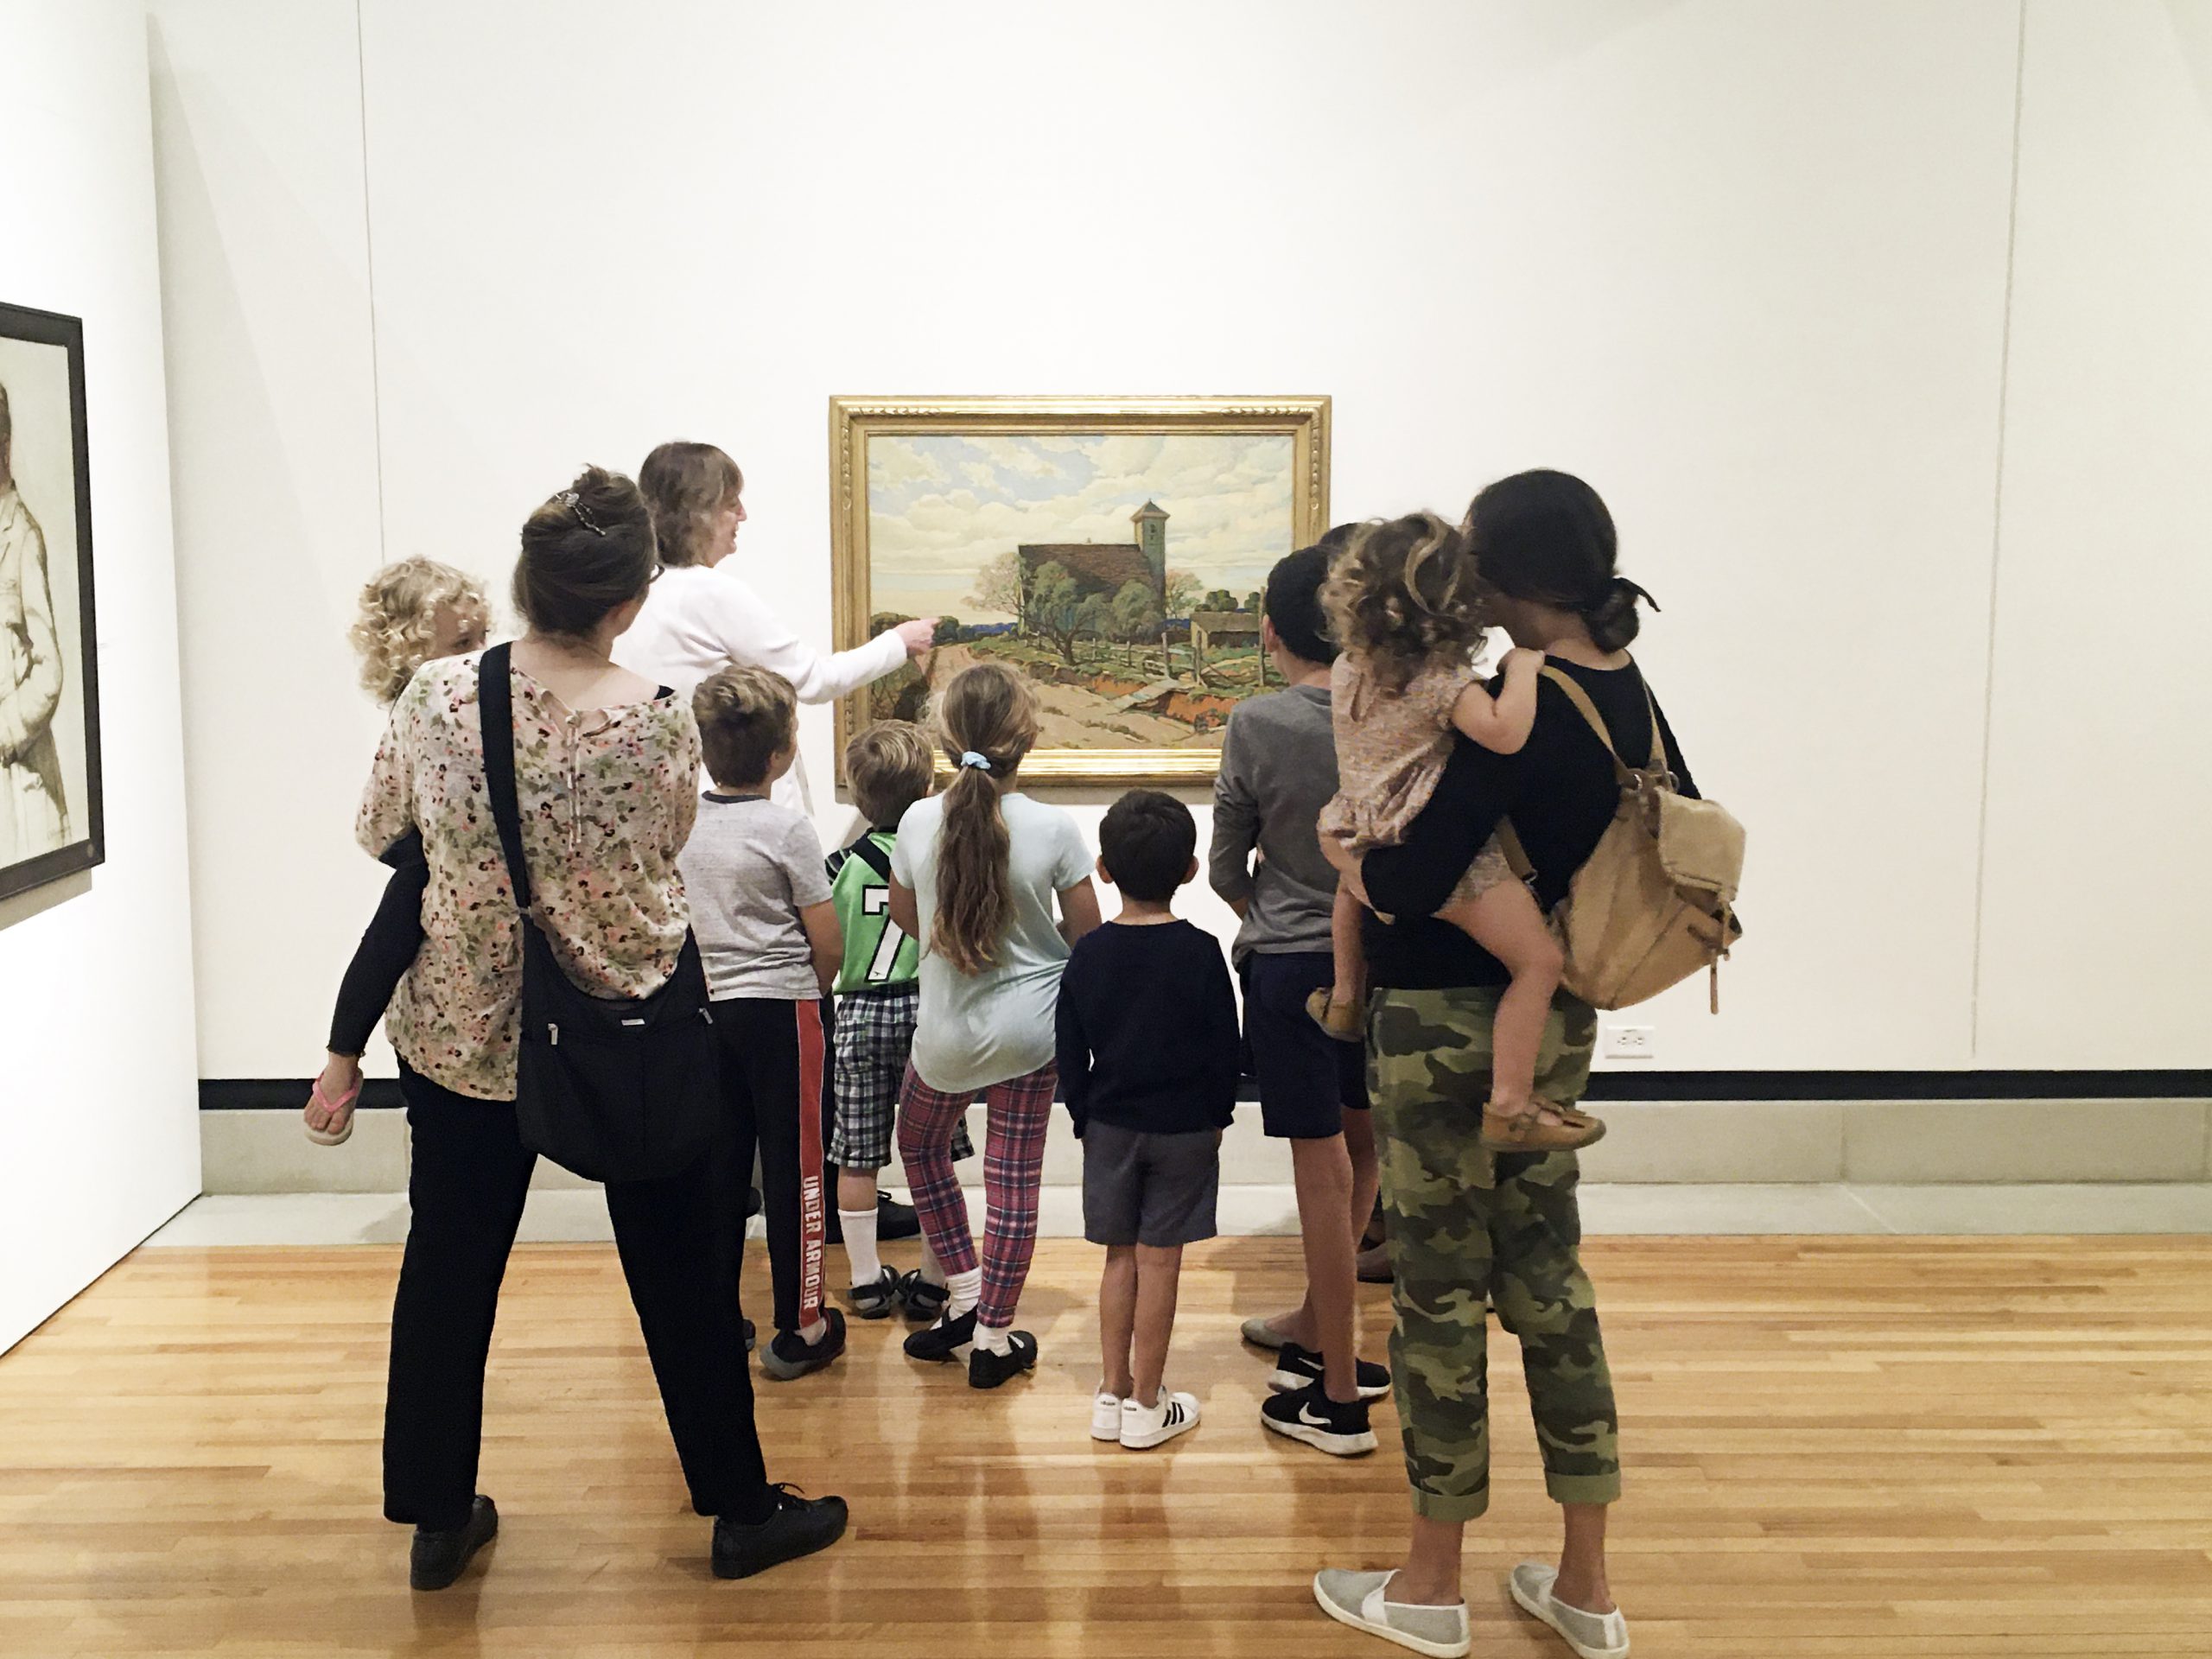 Group of young children learning about art at the University Art Galleries